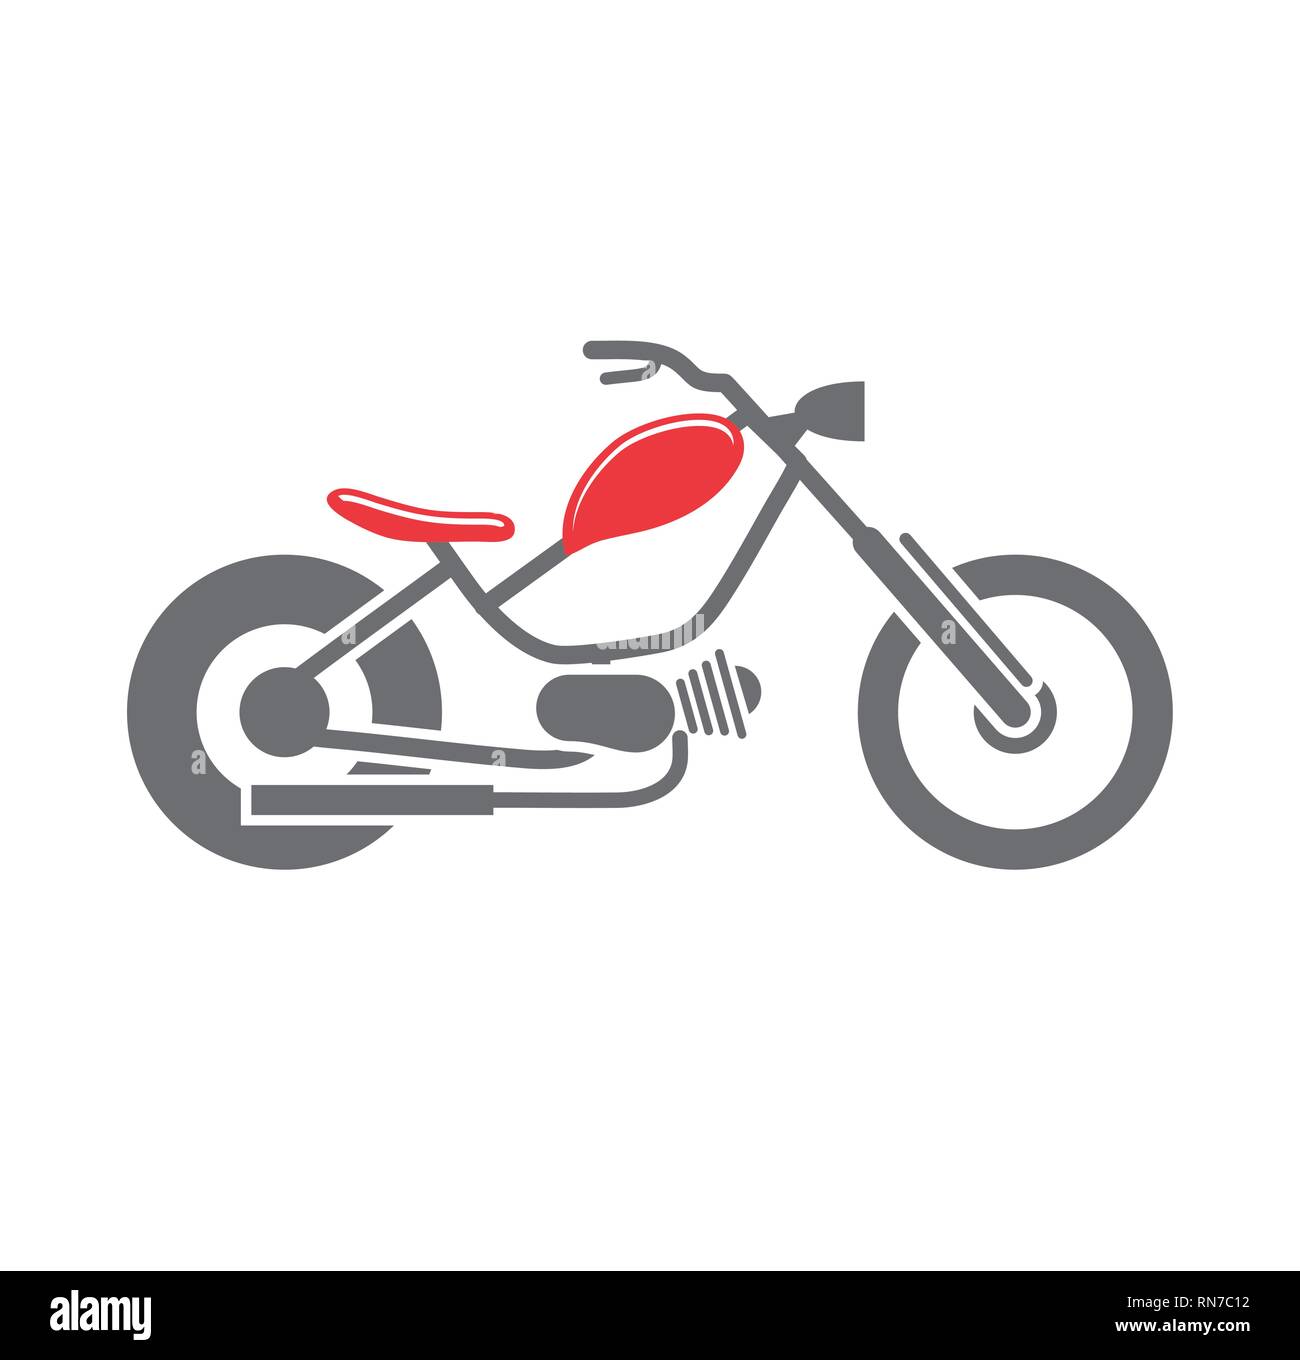 Classic Motorcycle icon on white background for graphic and web design, Modern simple vector sign. Internet concept. Trendy symbol for website design web button or mobile app. Stock Vector